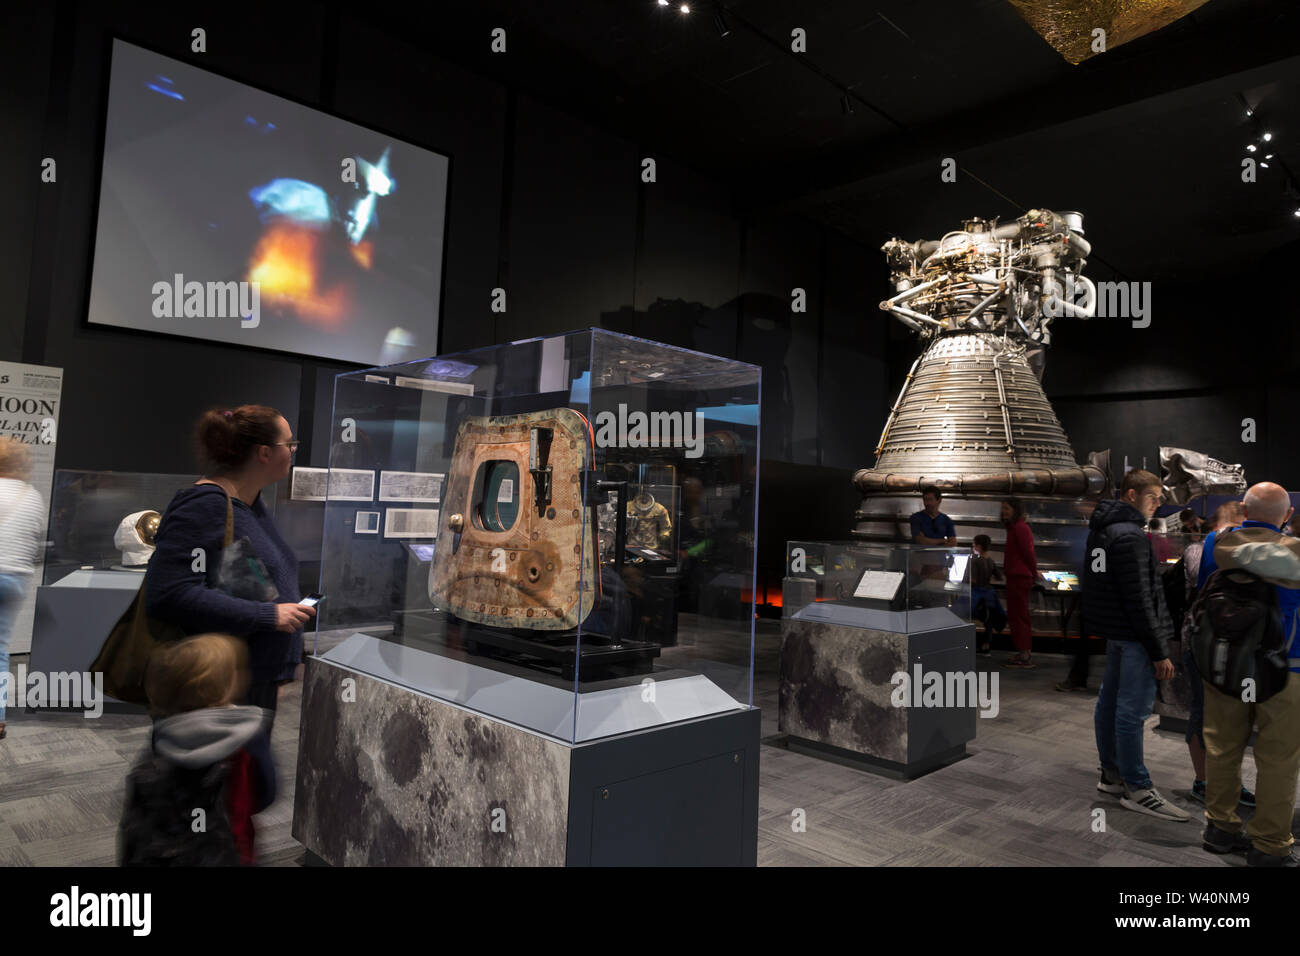 Visitors at the 'Destination Moon' exhibit at The Museum of Flight in Seattle, Washington on July 18, 2019. The exhibition, presented in partnership with the Smithsonian Institution, celebrates the Apollo 11 Mission during the 50th anniversary of the landmark moon landing. Stock Photo